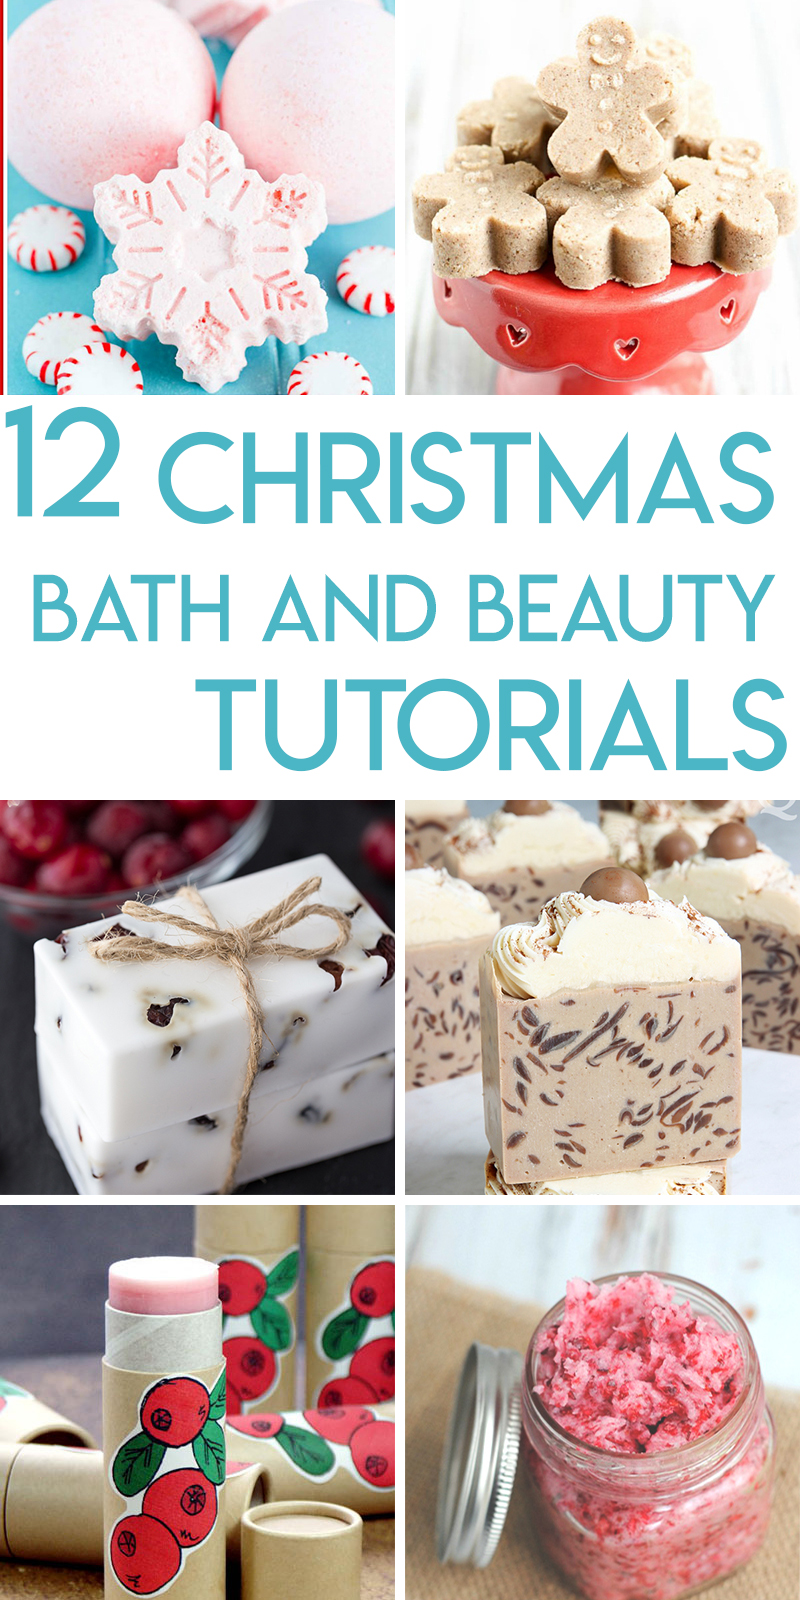 12 Christmas inspired bath and beauty recipes and tutorials